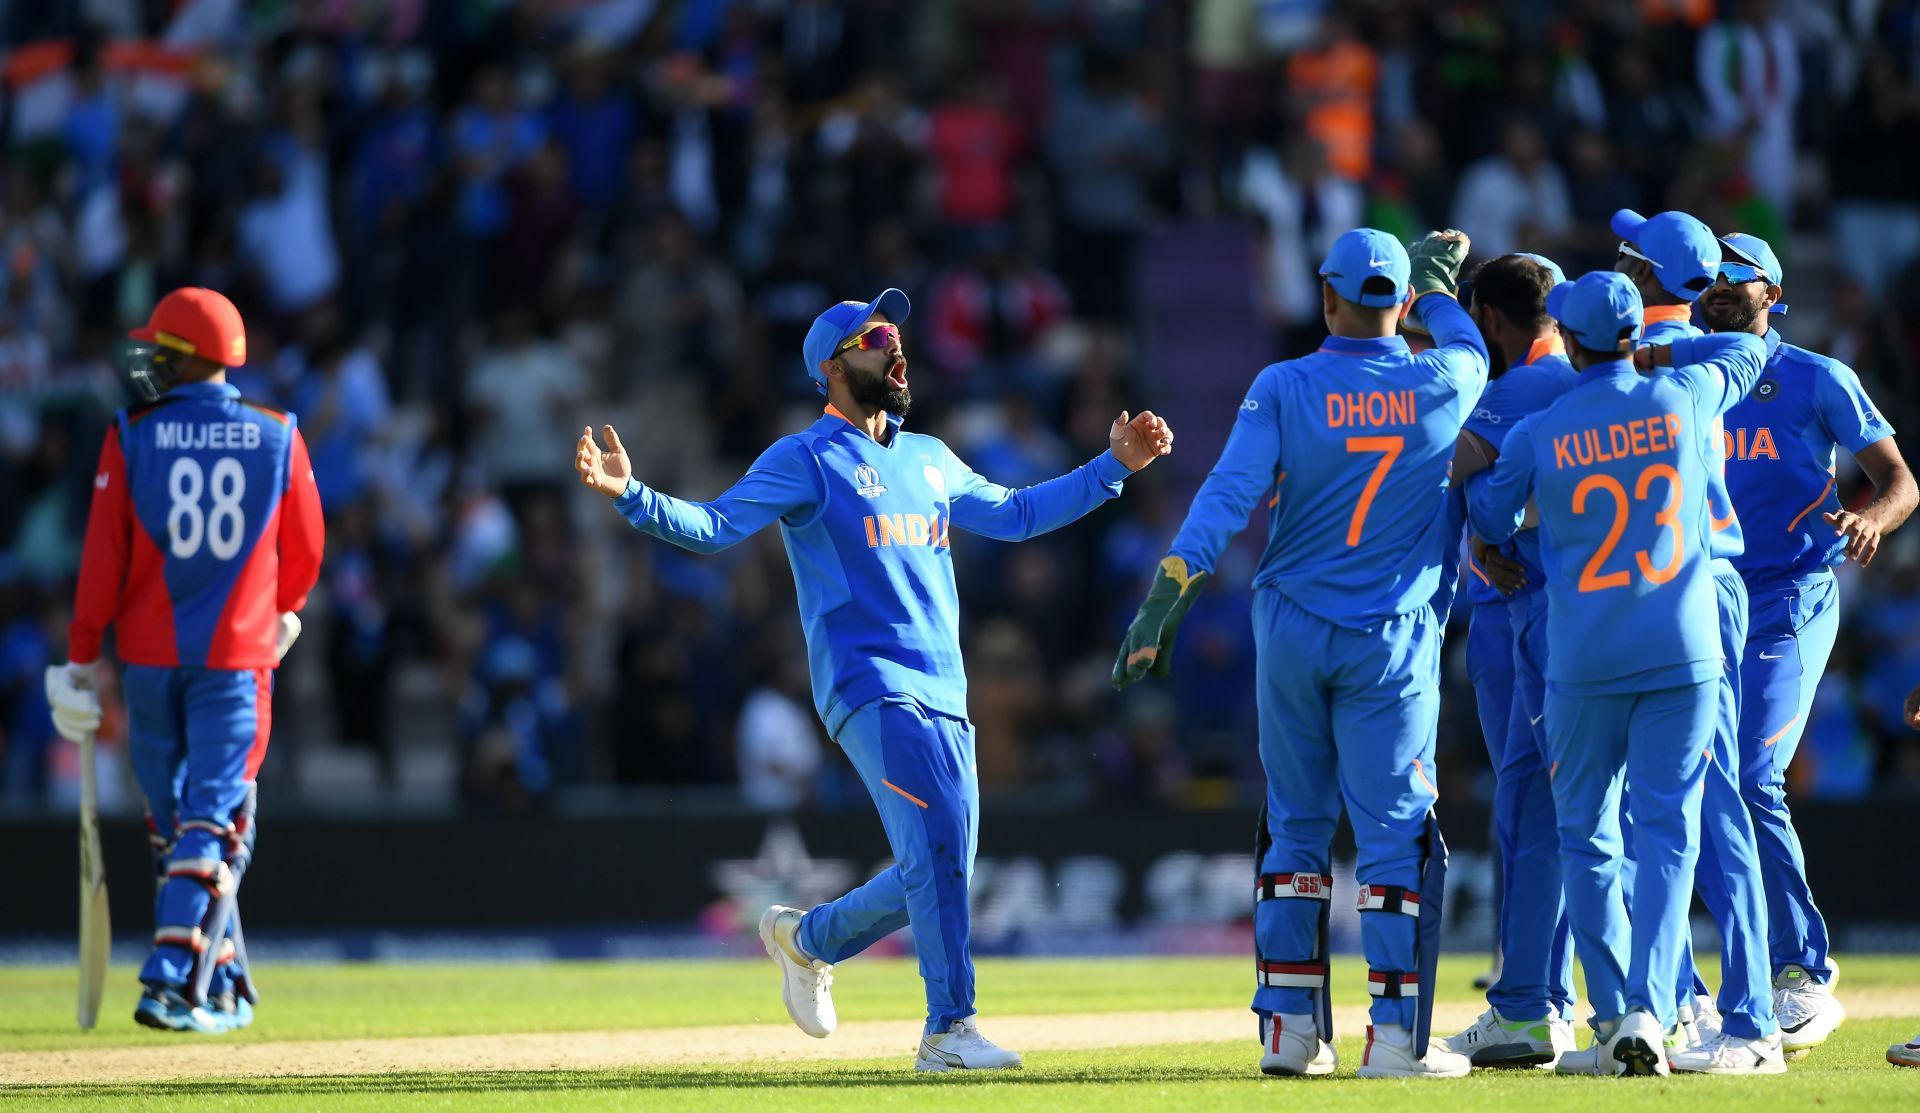 India won a close game against Afghanistan at the 2019 World Cup.